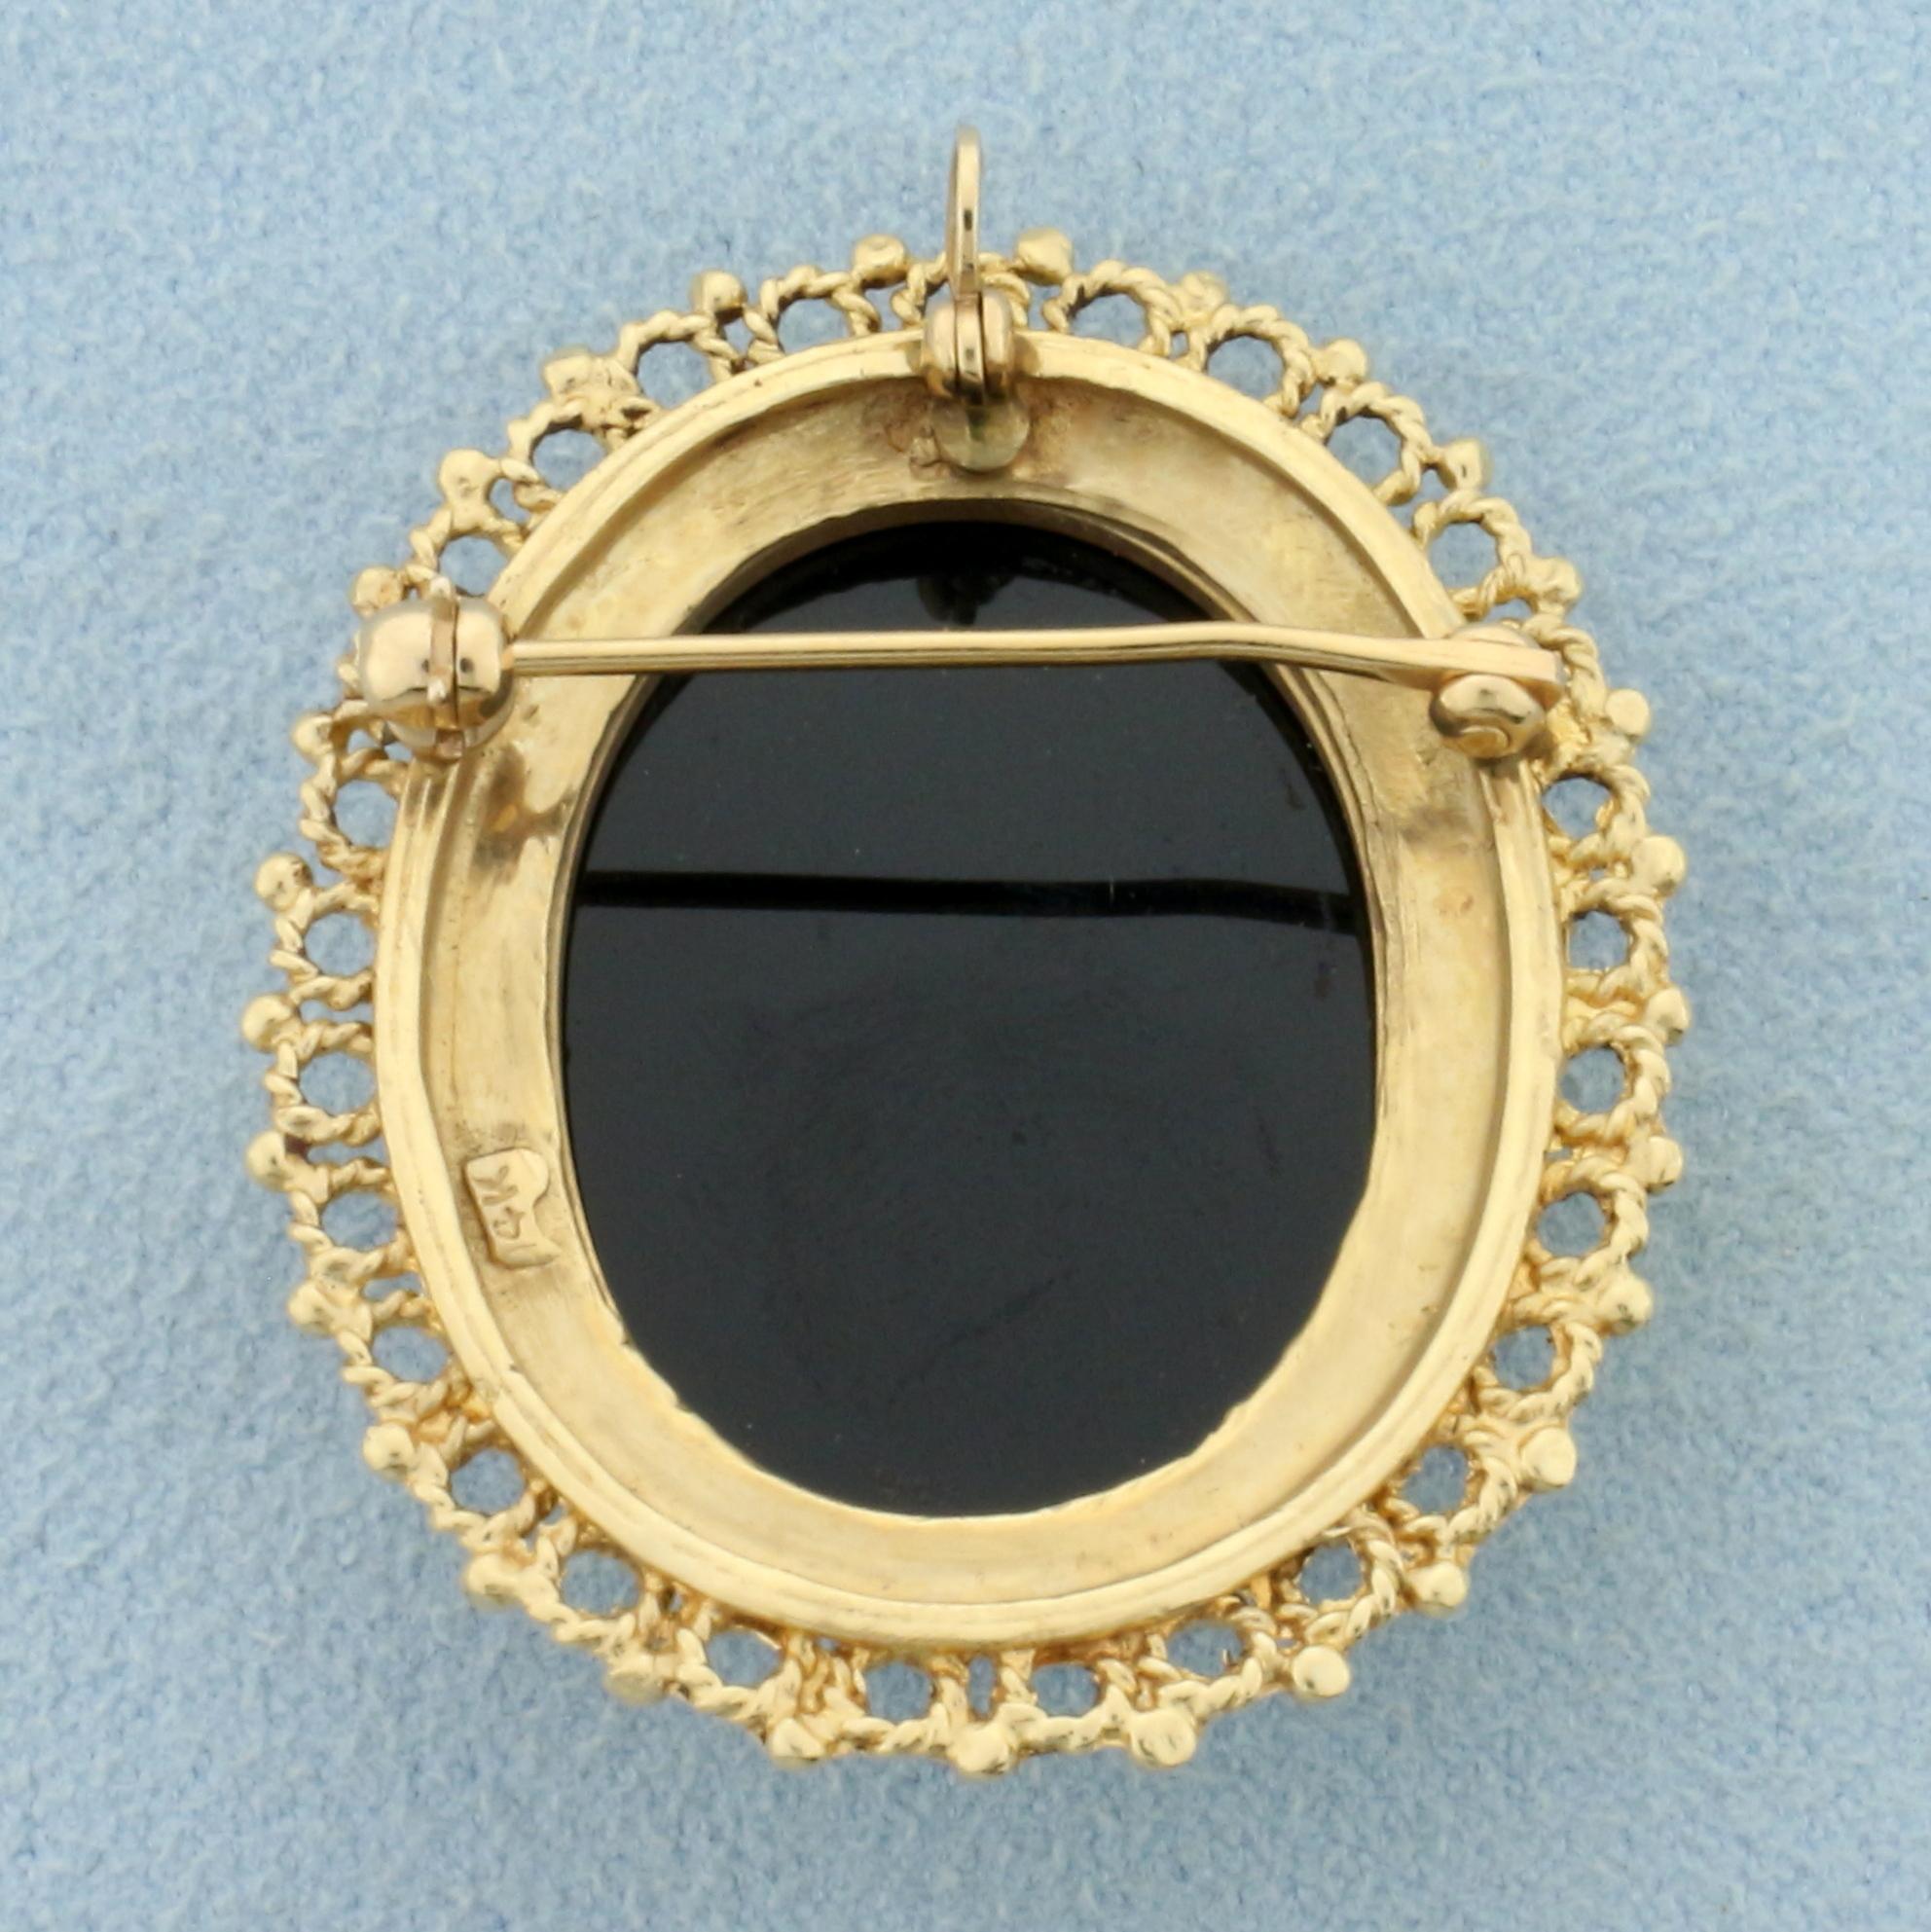 Vintage Cameo Pendant Or Pin In 14k Yellow Gold